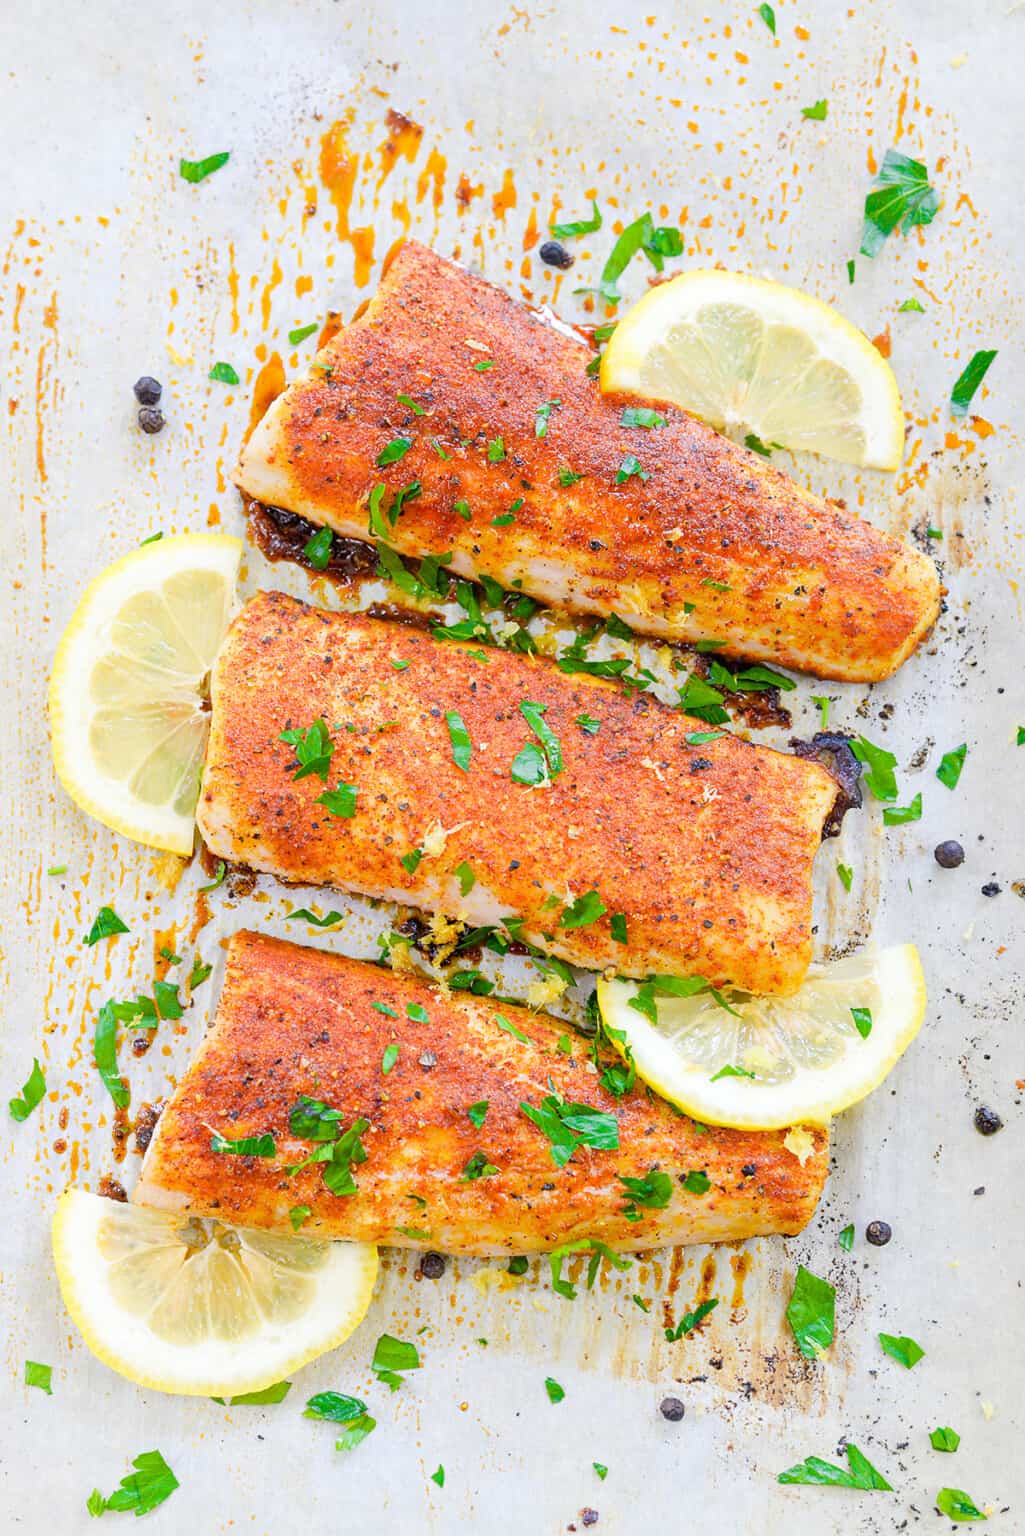 Baked Lemon Pepper Fish Recipe | That Low Carb Life